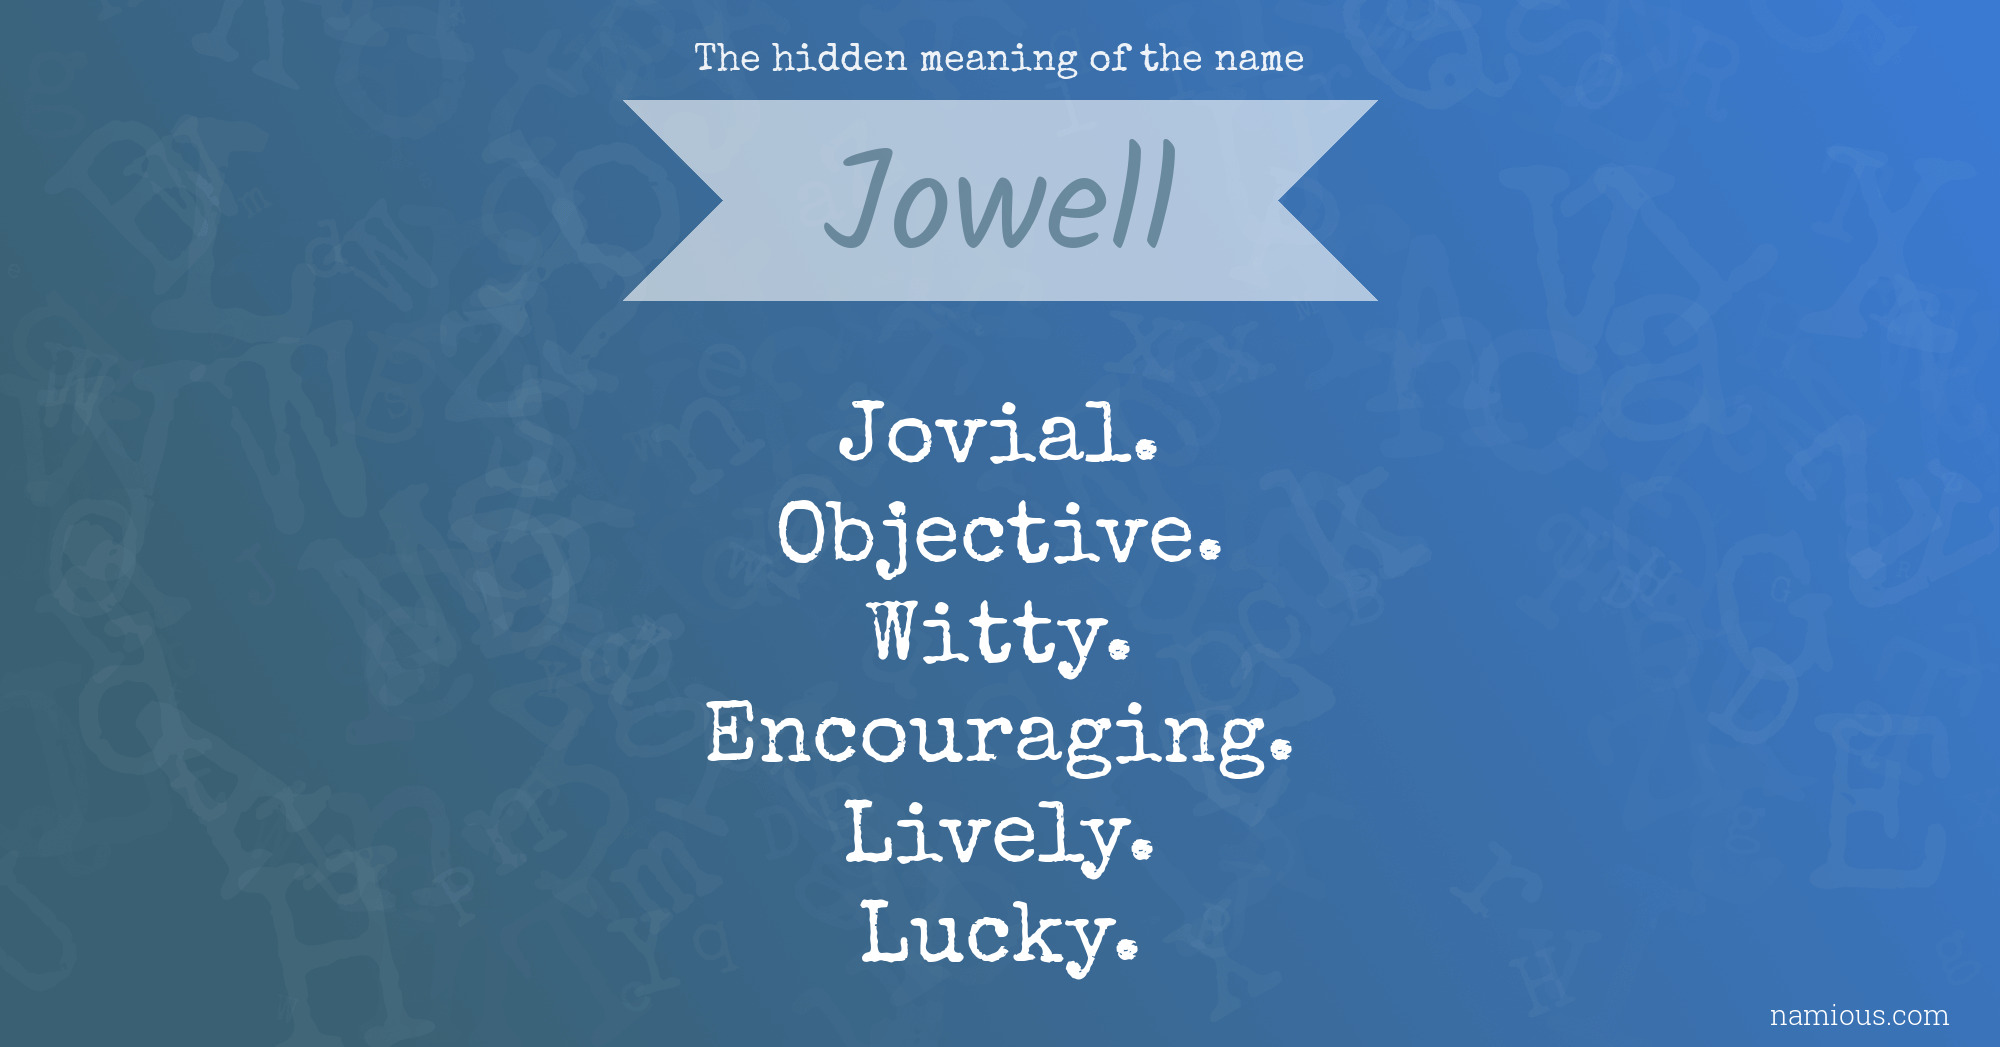 The hidden meaning of the name Jowell